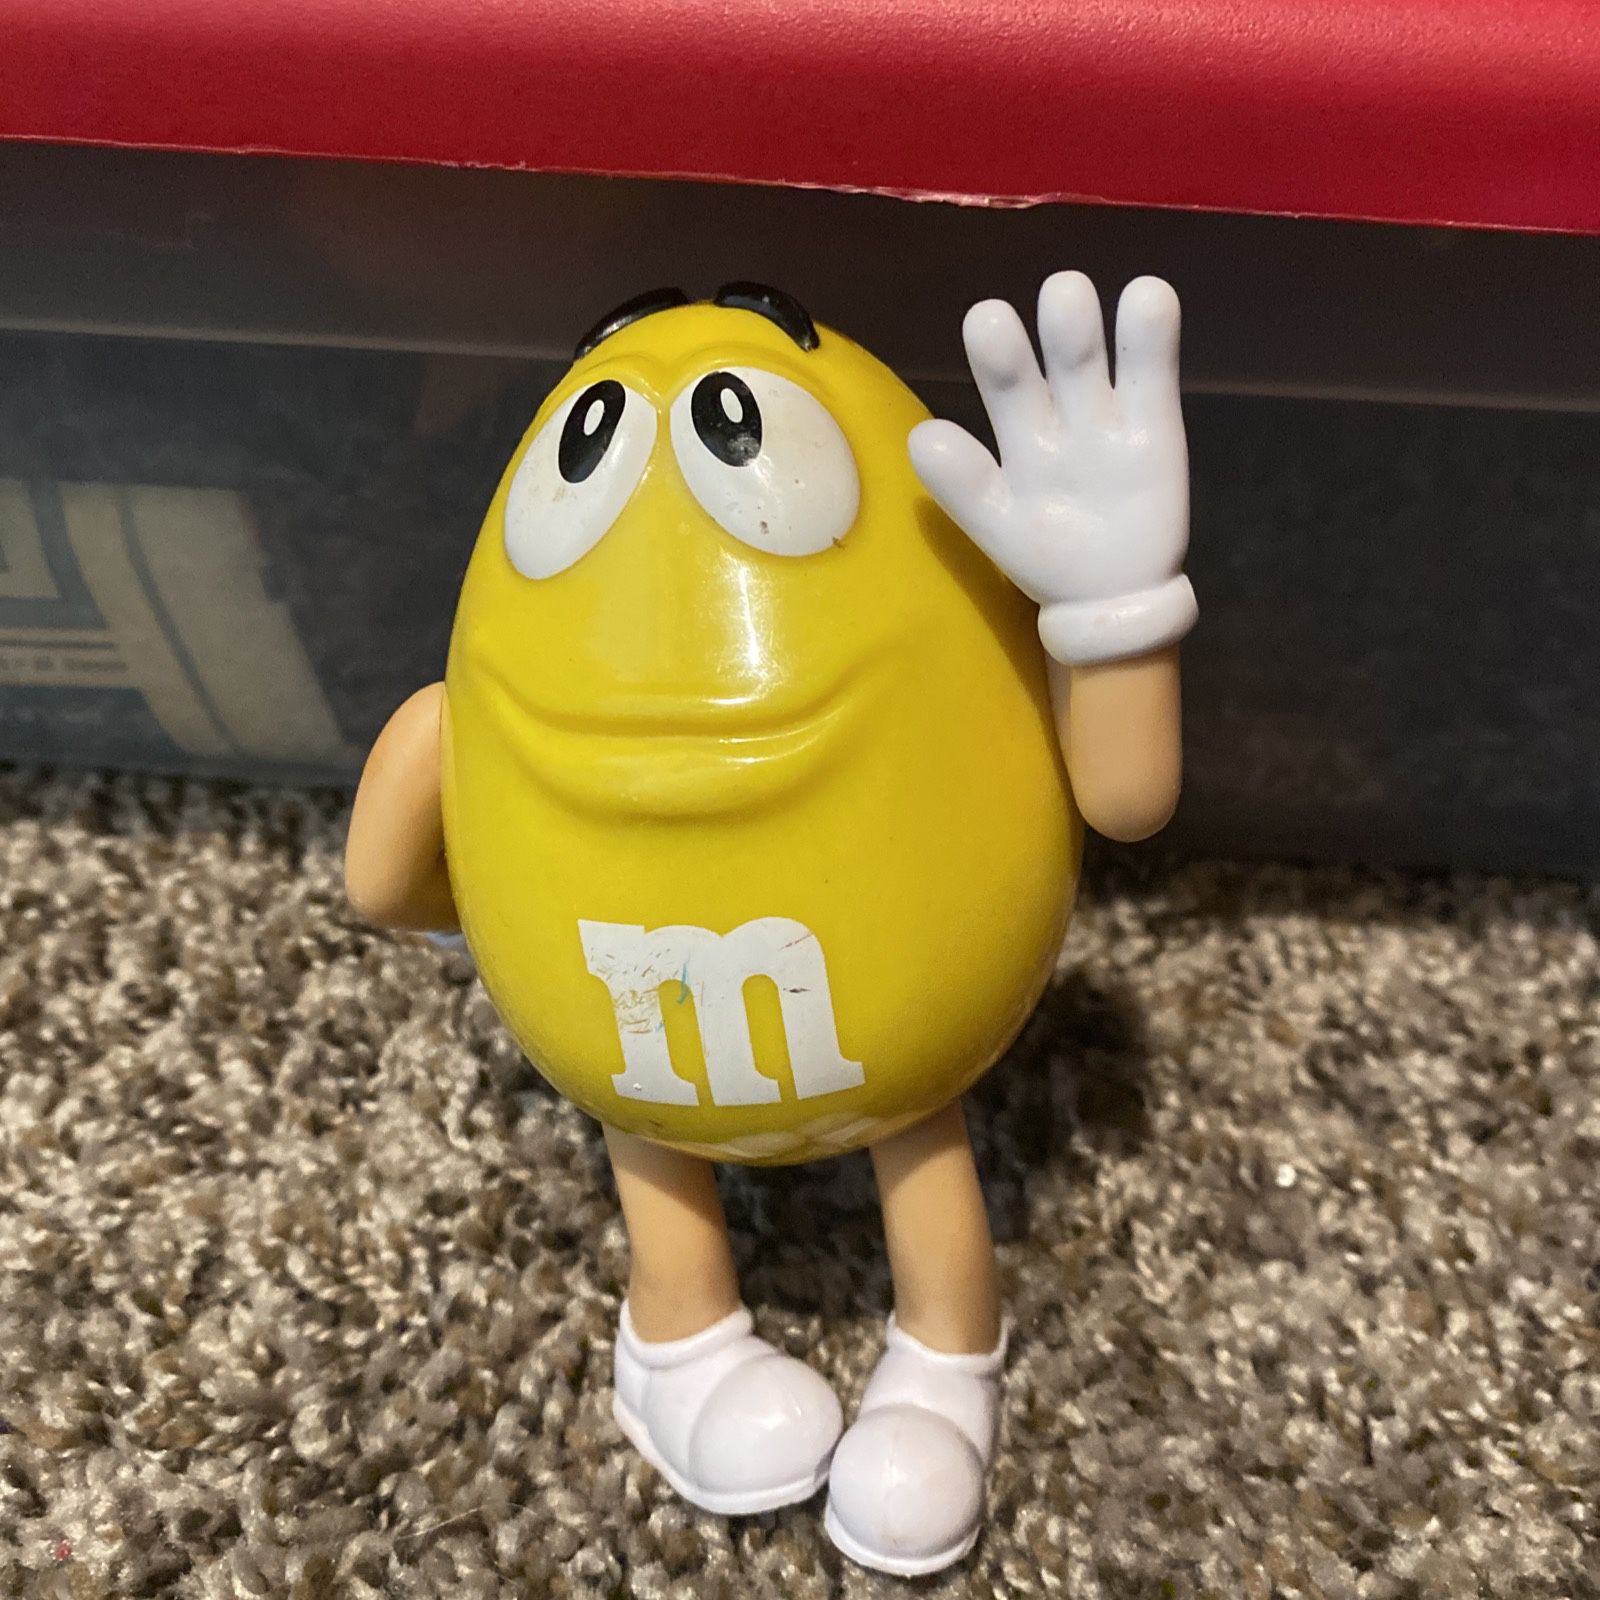 Used Yellow Peanut M&M Character Candy Store Display with Storage Tray for  Sale in Inman, SC - OfferUp